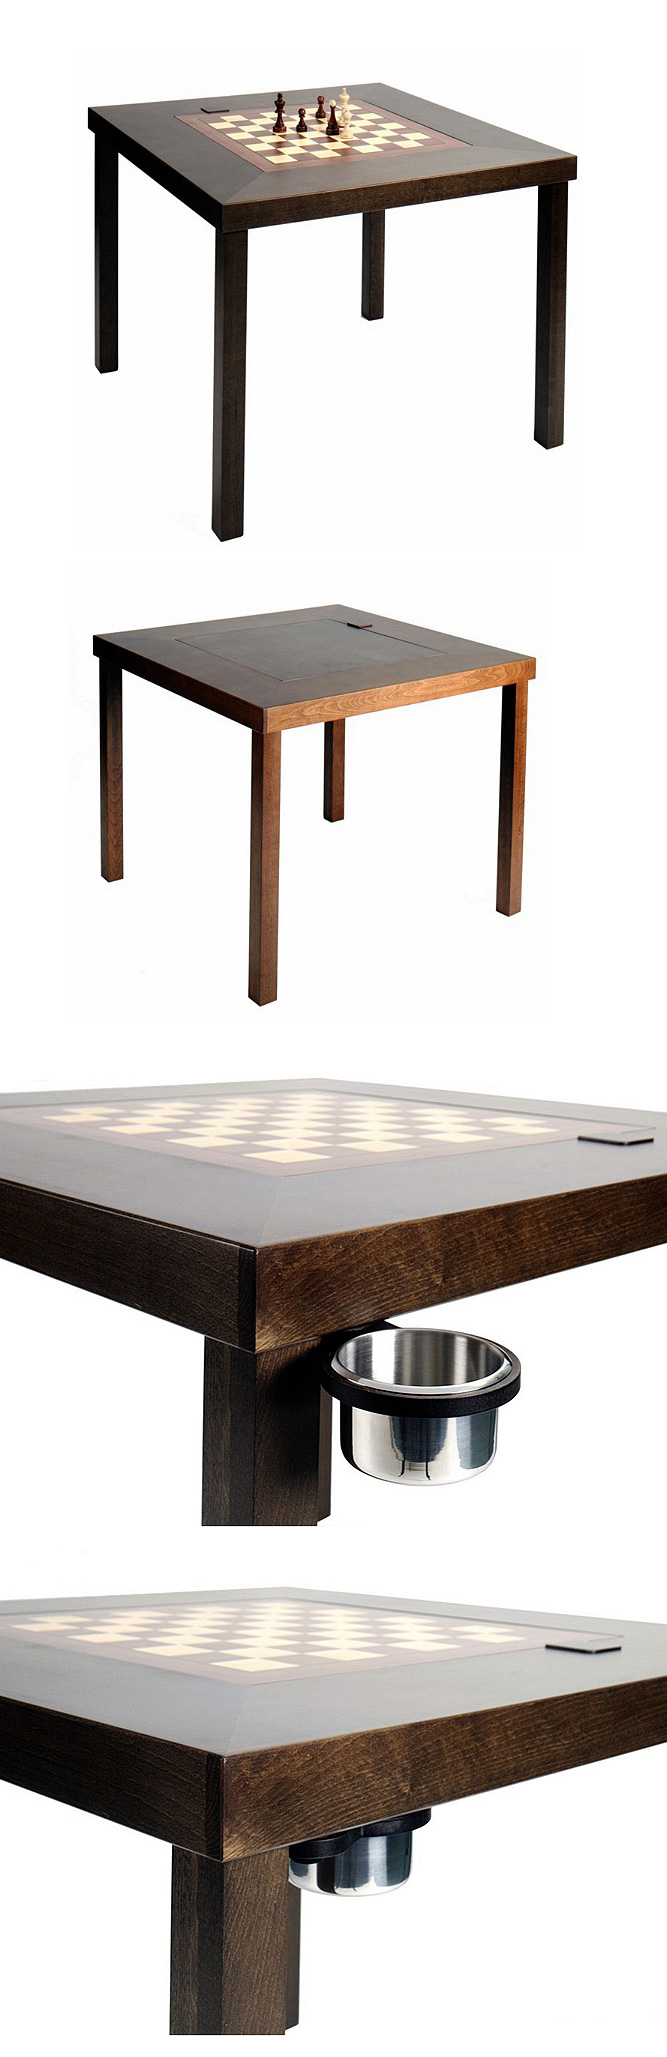 Fide Luxurious Game Table